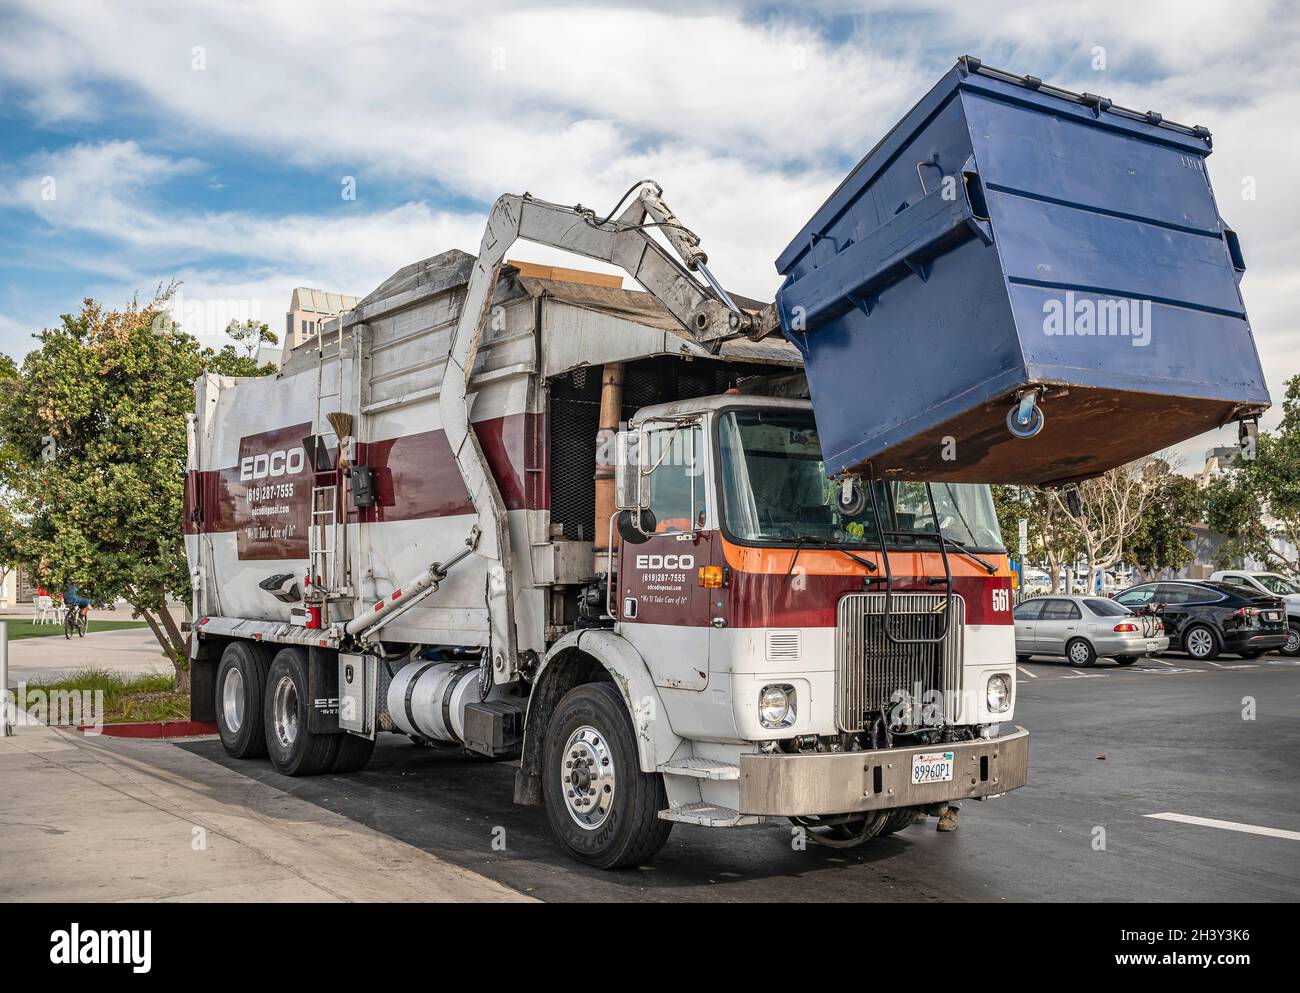 San Diego, California, USA - October 4, 2021: South Embarcadero boardwalk.  White-brown front-loading EDCO trash pickup truck in operation under blue c  Stock Photo - Alamy